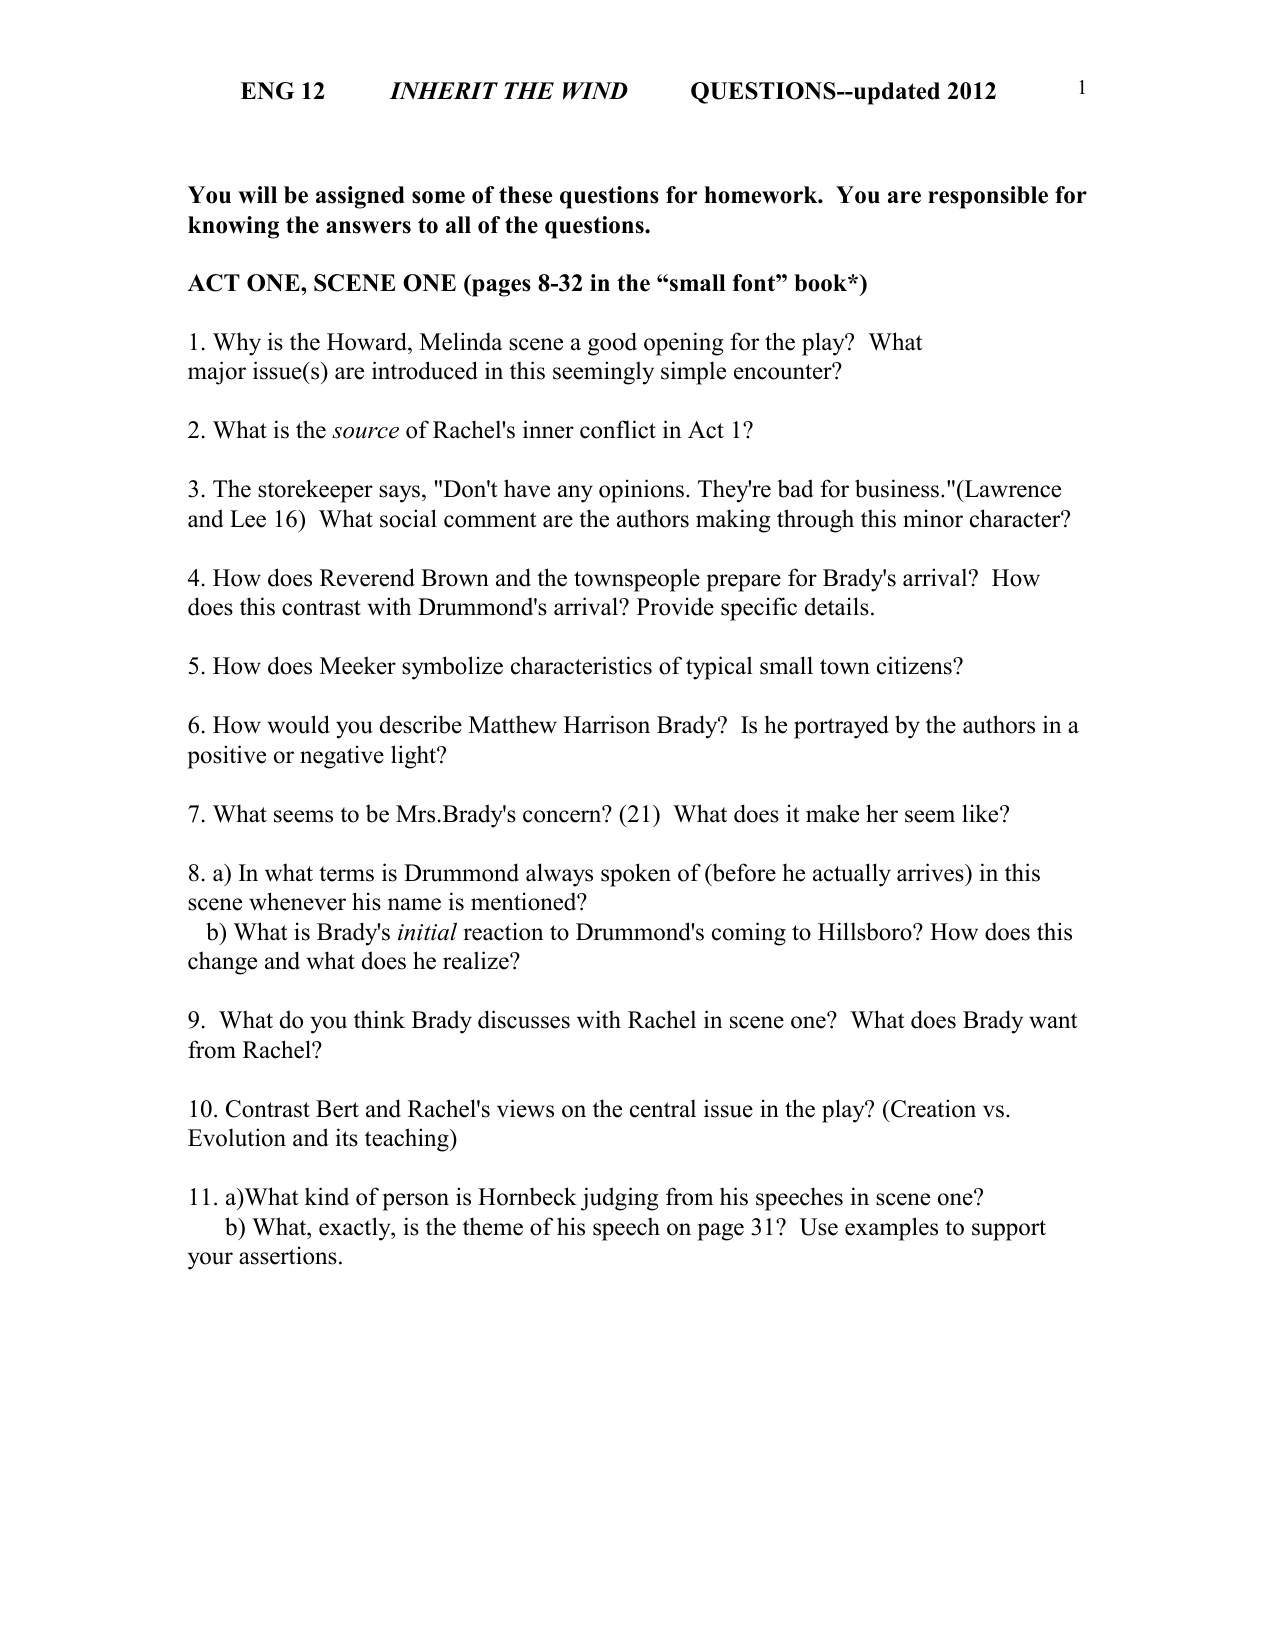 ENG 441 INHERIT THE WIND QUESTIONS